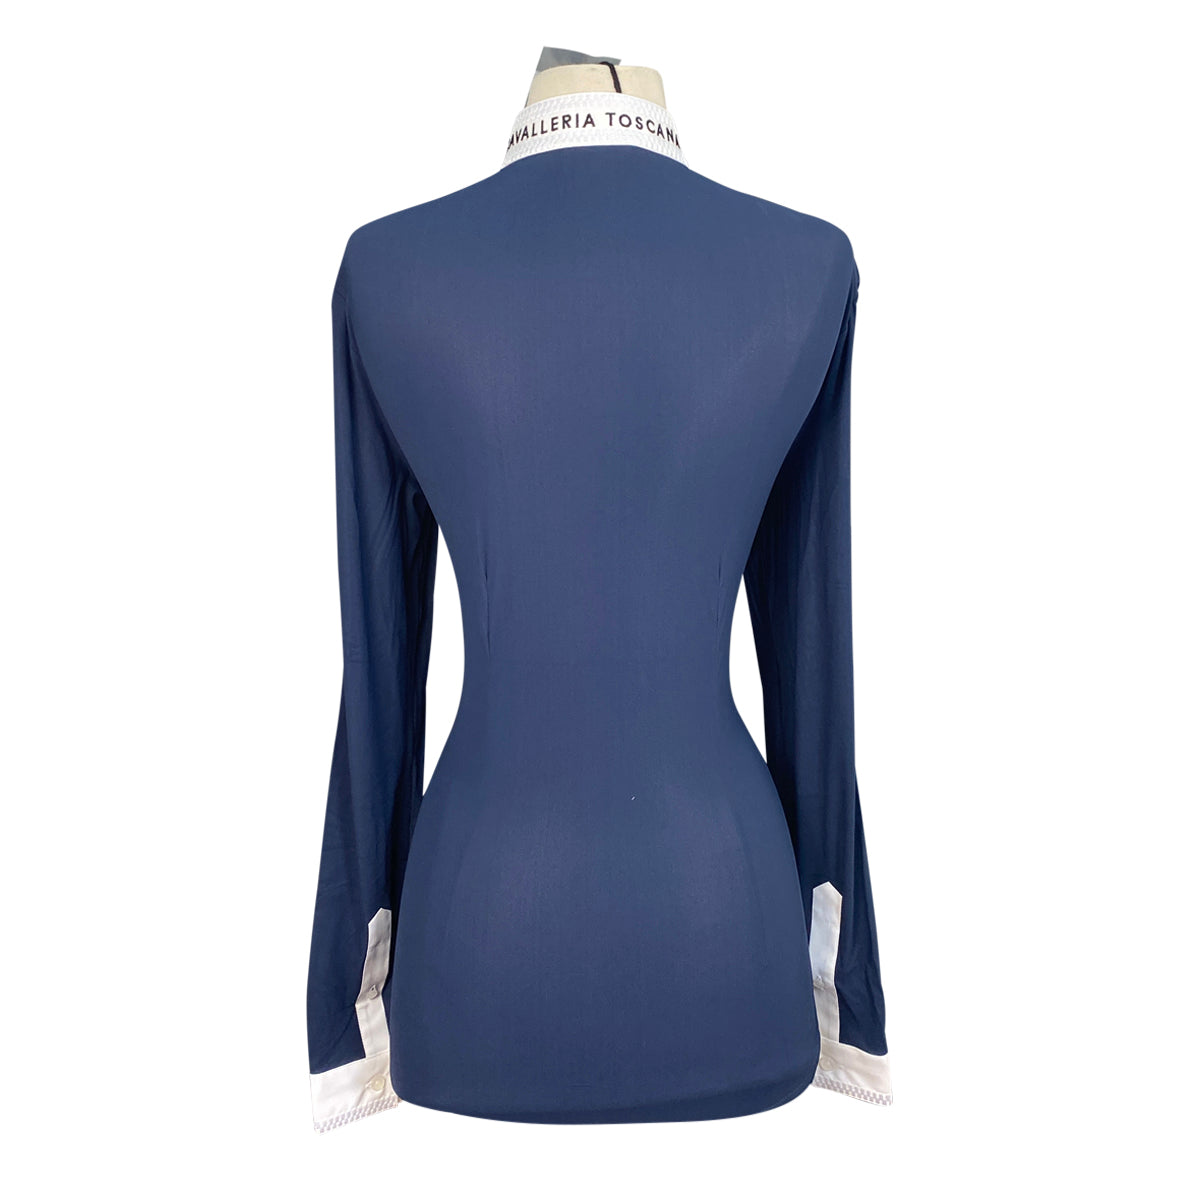 Cavalleria Toscana L/S Jersey Competition Shirt in Ocean Blue